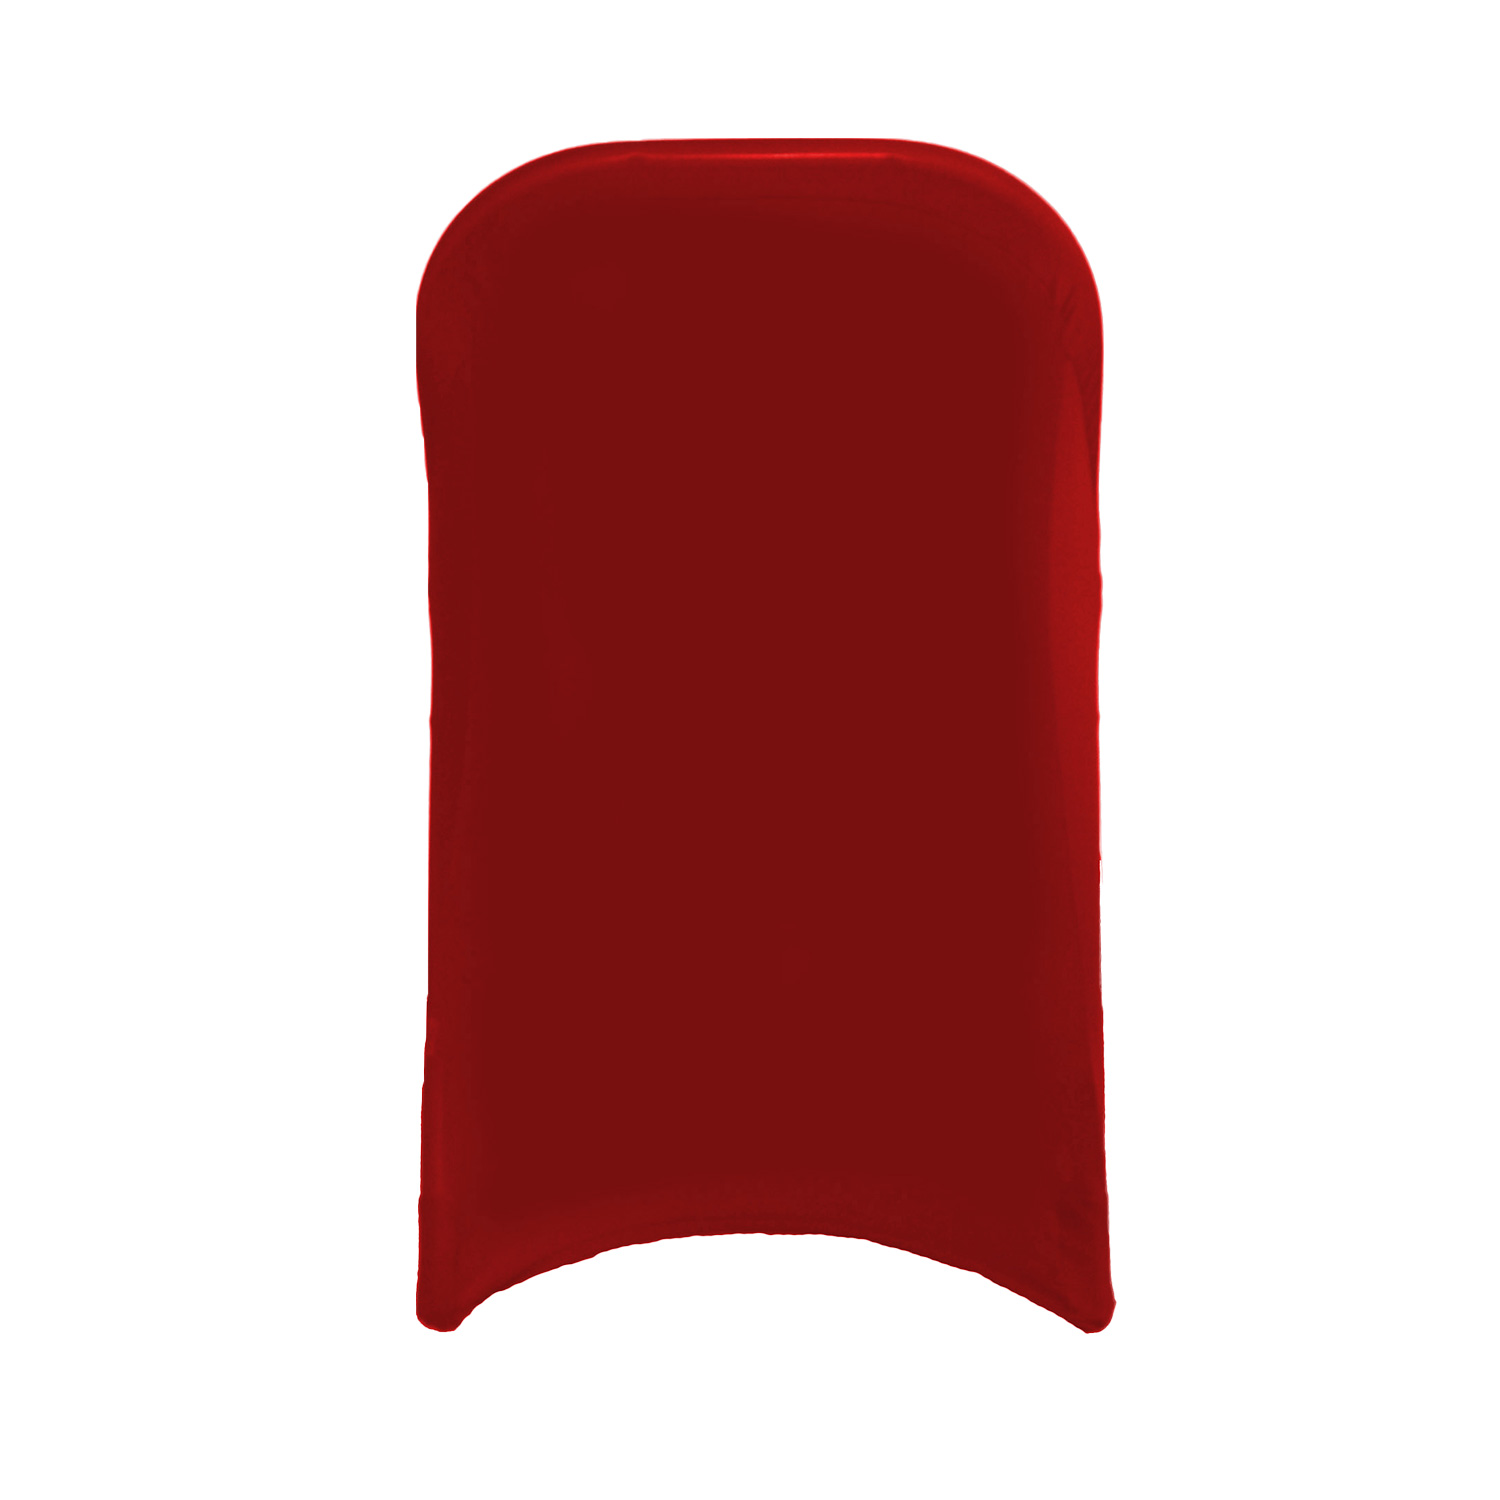 Your Chair Covers - Spandex Folding Chair Cover Red for Wedding, Party, Birthday, Patio, etc. - image 2 of 5